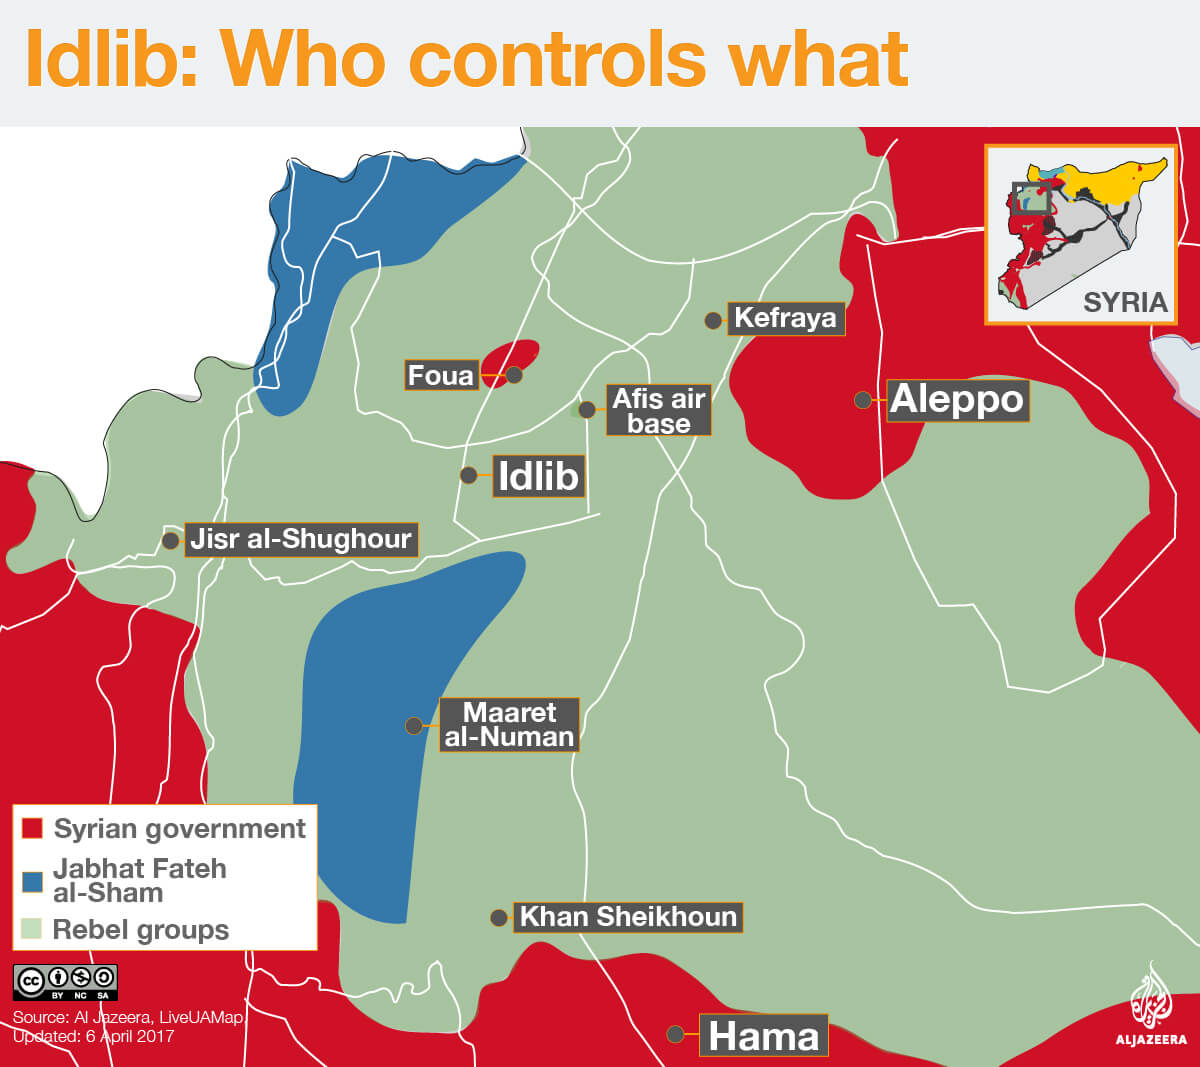 Map of who controls what in the Idlib province of Syria [Al Jazeera]